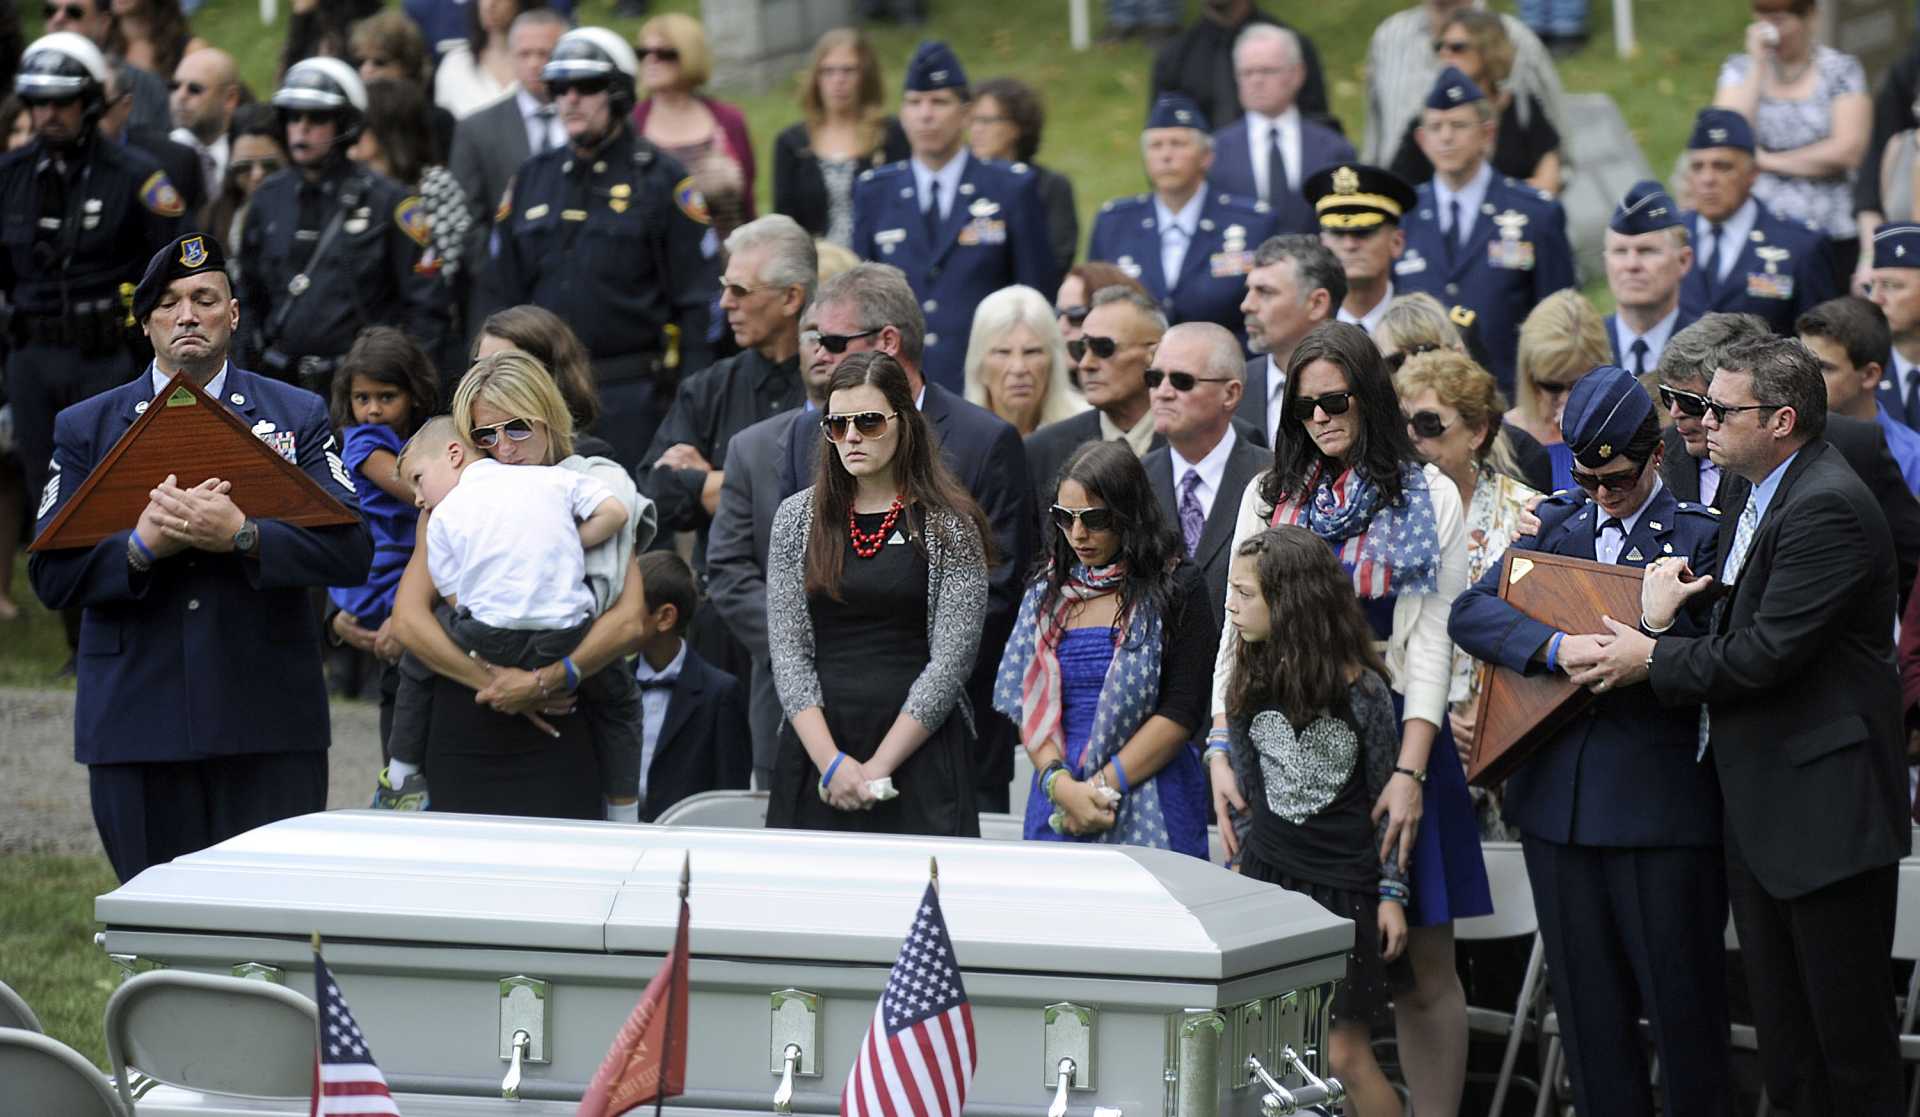 Staff Sgt. Todd T.J. Lobraico Jr. was killed when his Air National Guard unit was attacked in Afghanistan. His hometown of New Fairfield, Conn. gave him a hero’s funeral.